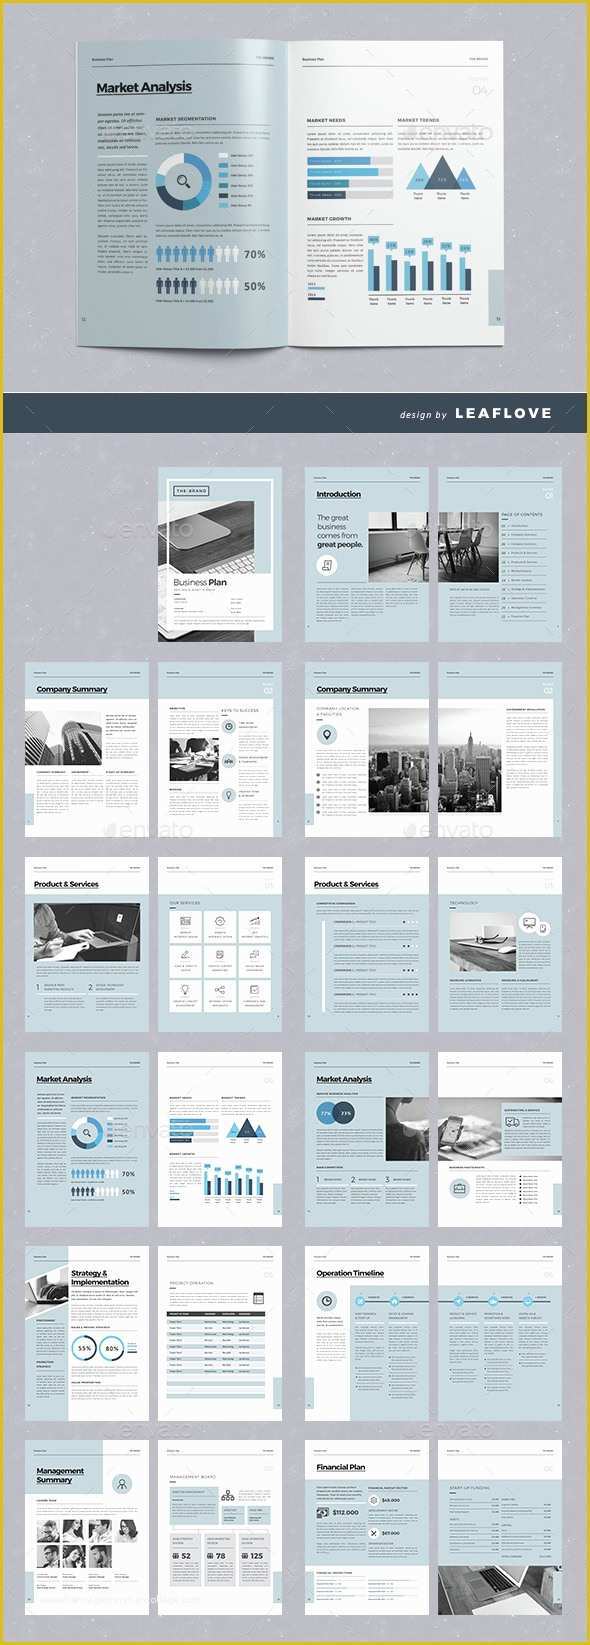 Presentation Indesign Template Free Of 65 Fresh Indesign Templates and where to Find More Redokun